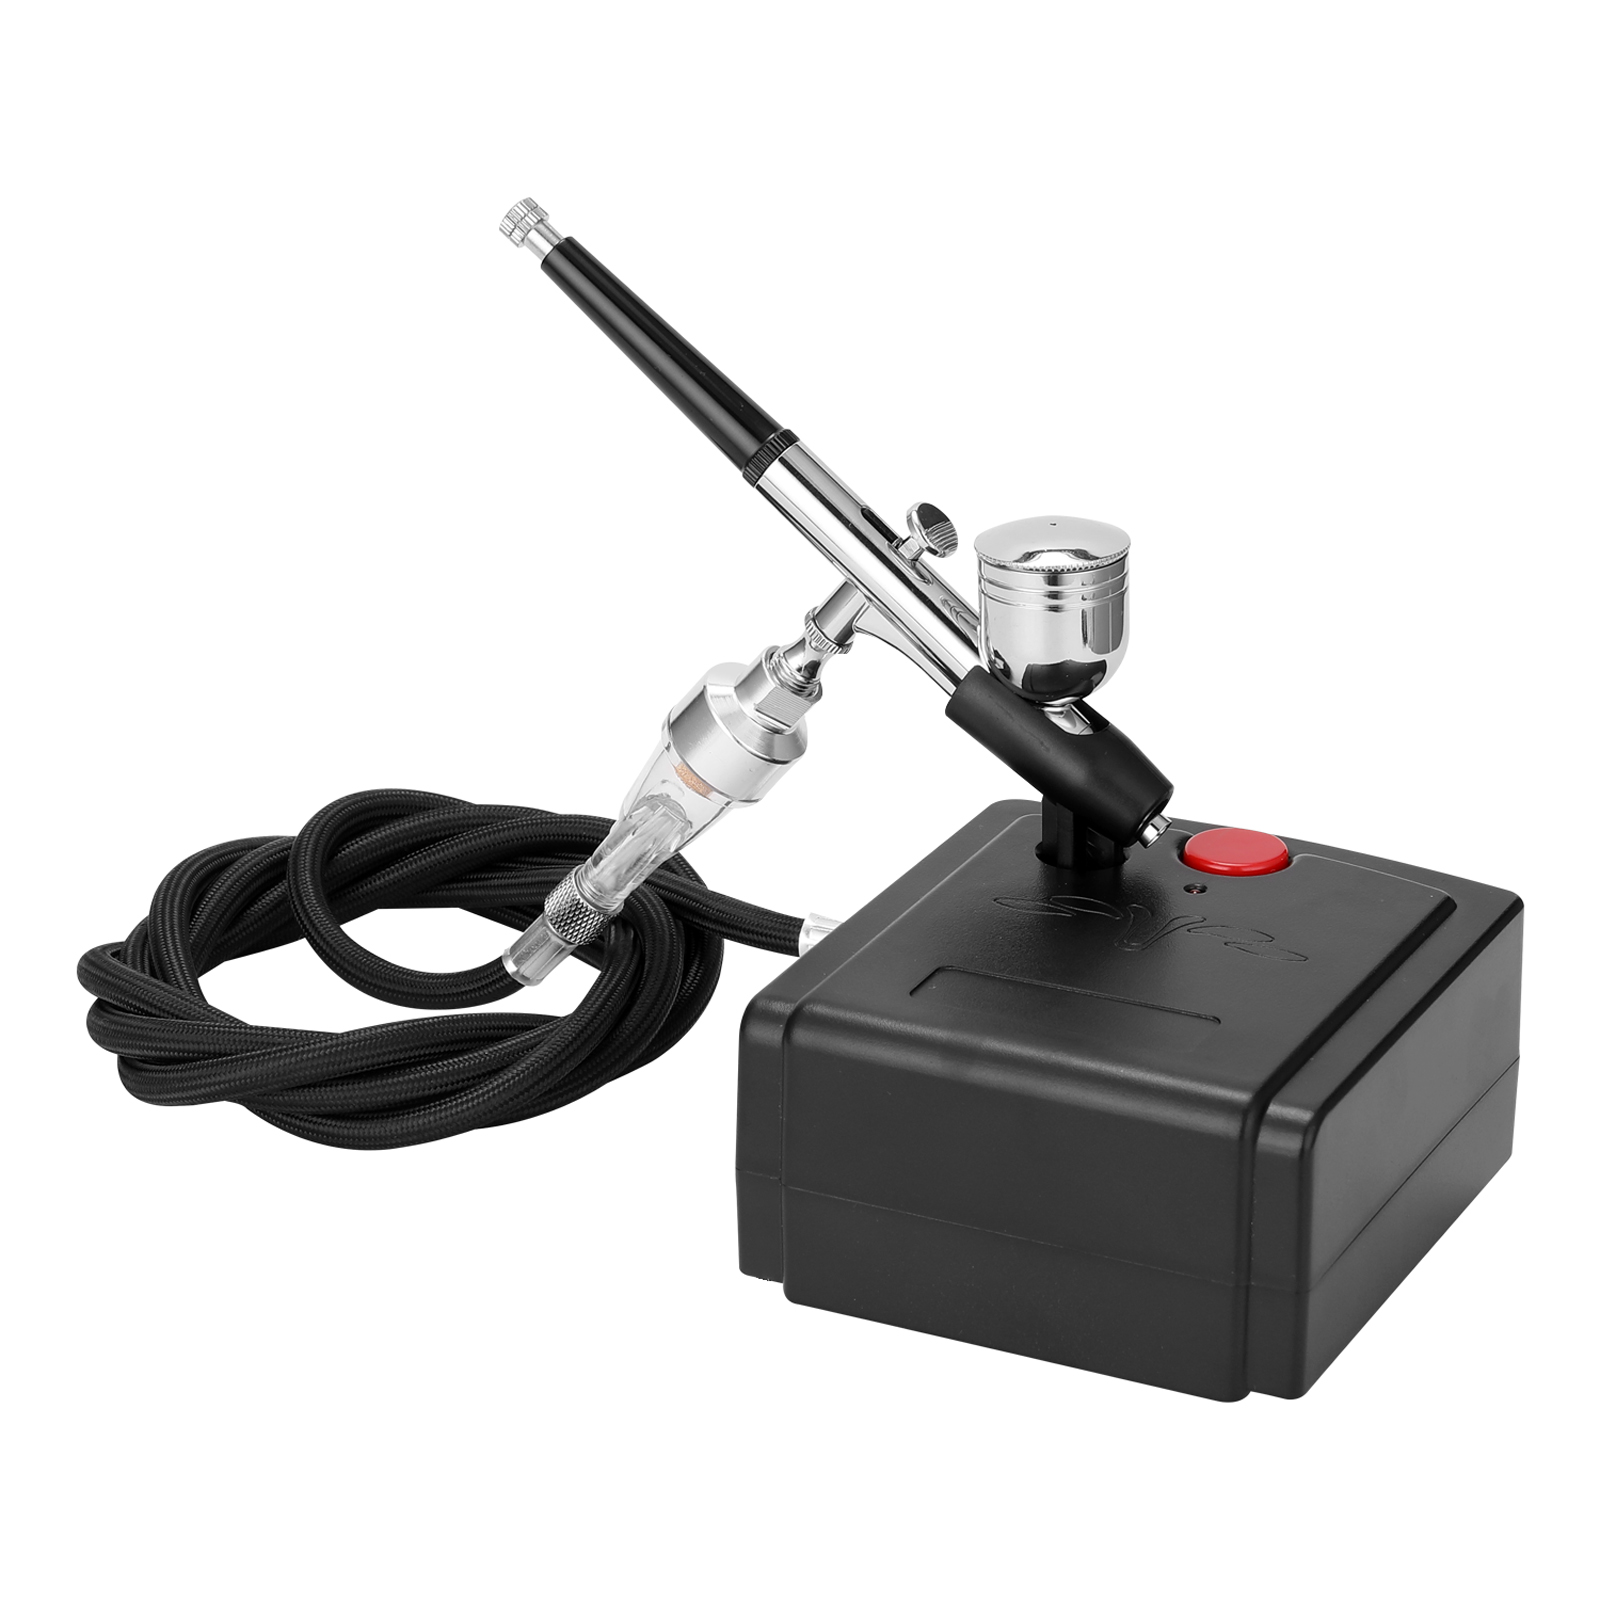 Dual Action Airbrush Kit with 3 Airbrushes and Compressor